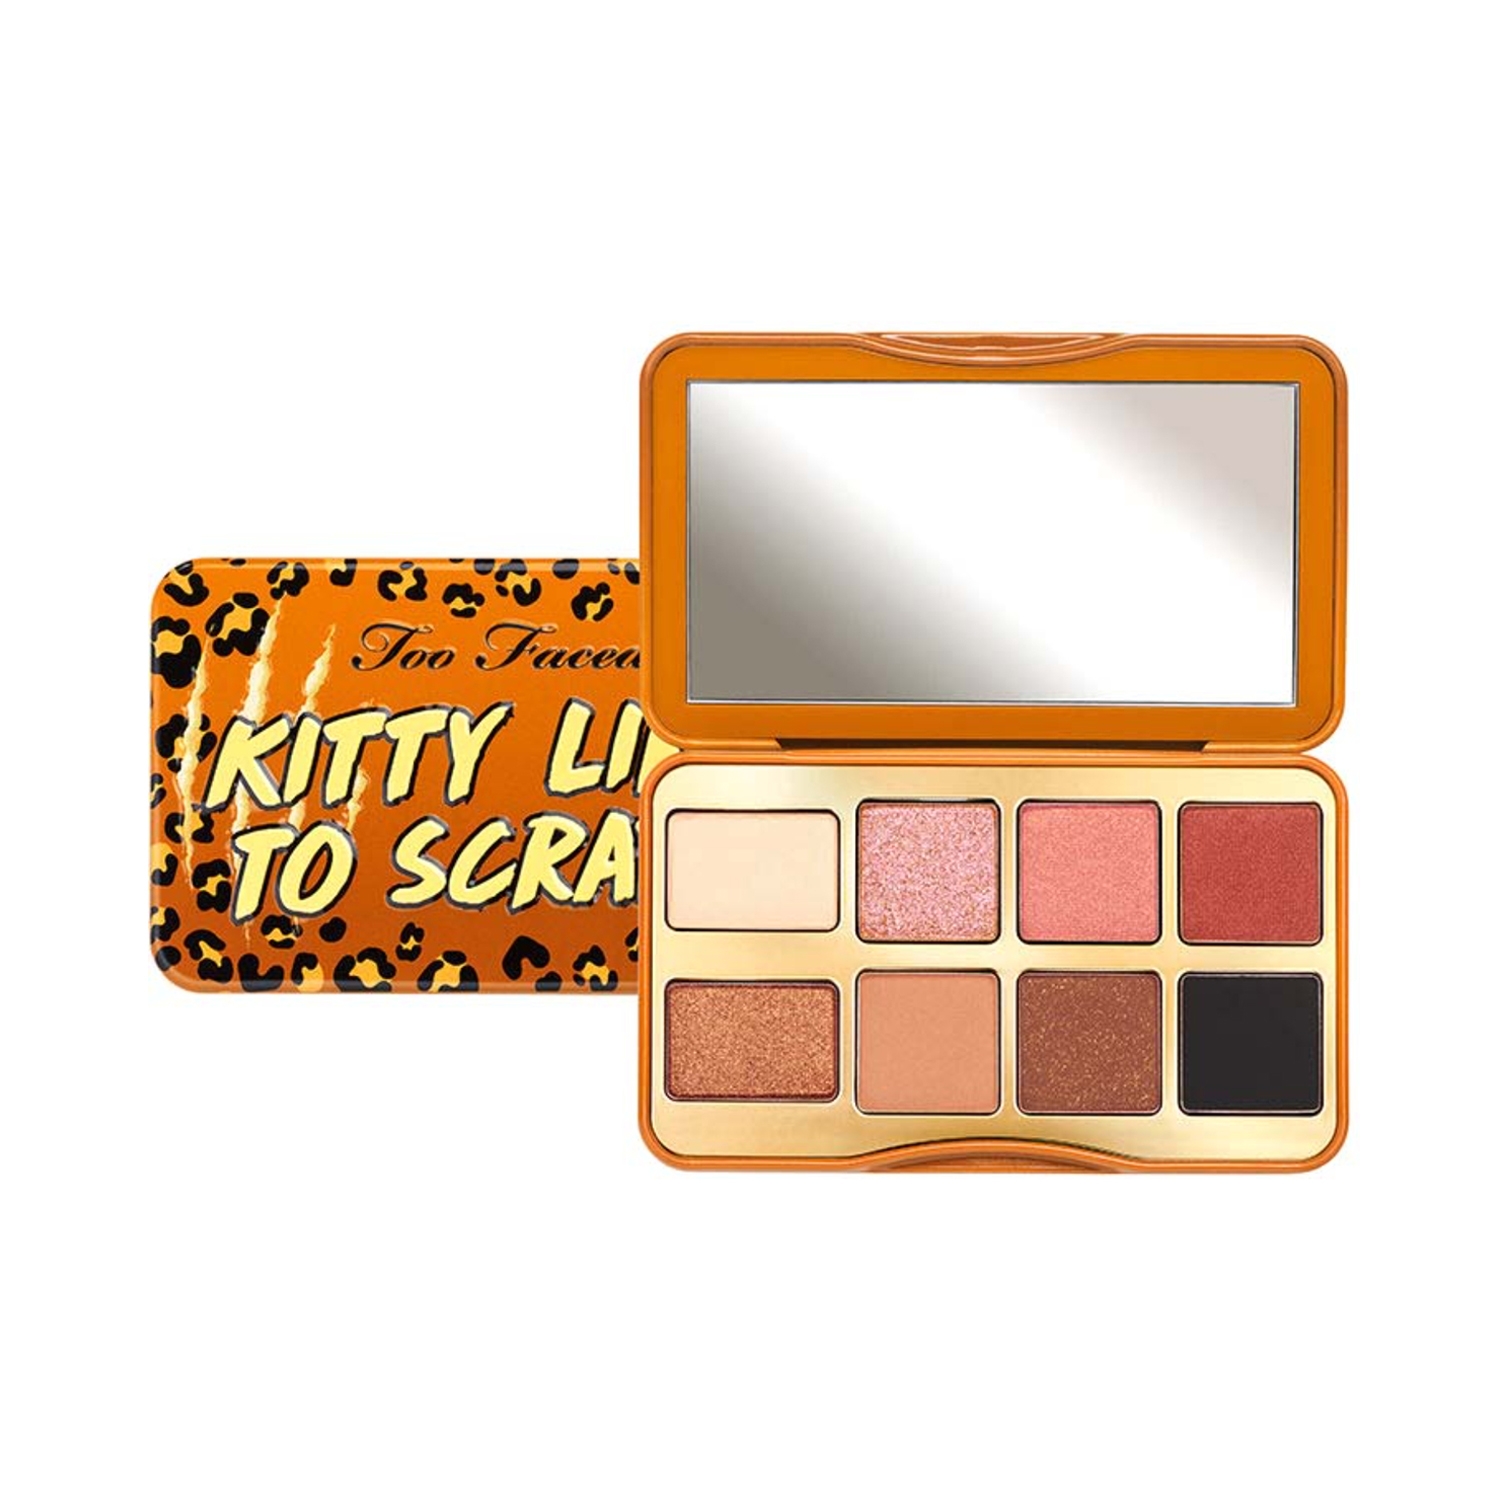 Too Faced Kitty Likes To Scratch Eye Palette - Multi-Color (4.8g)